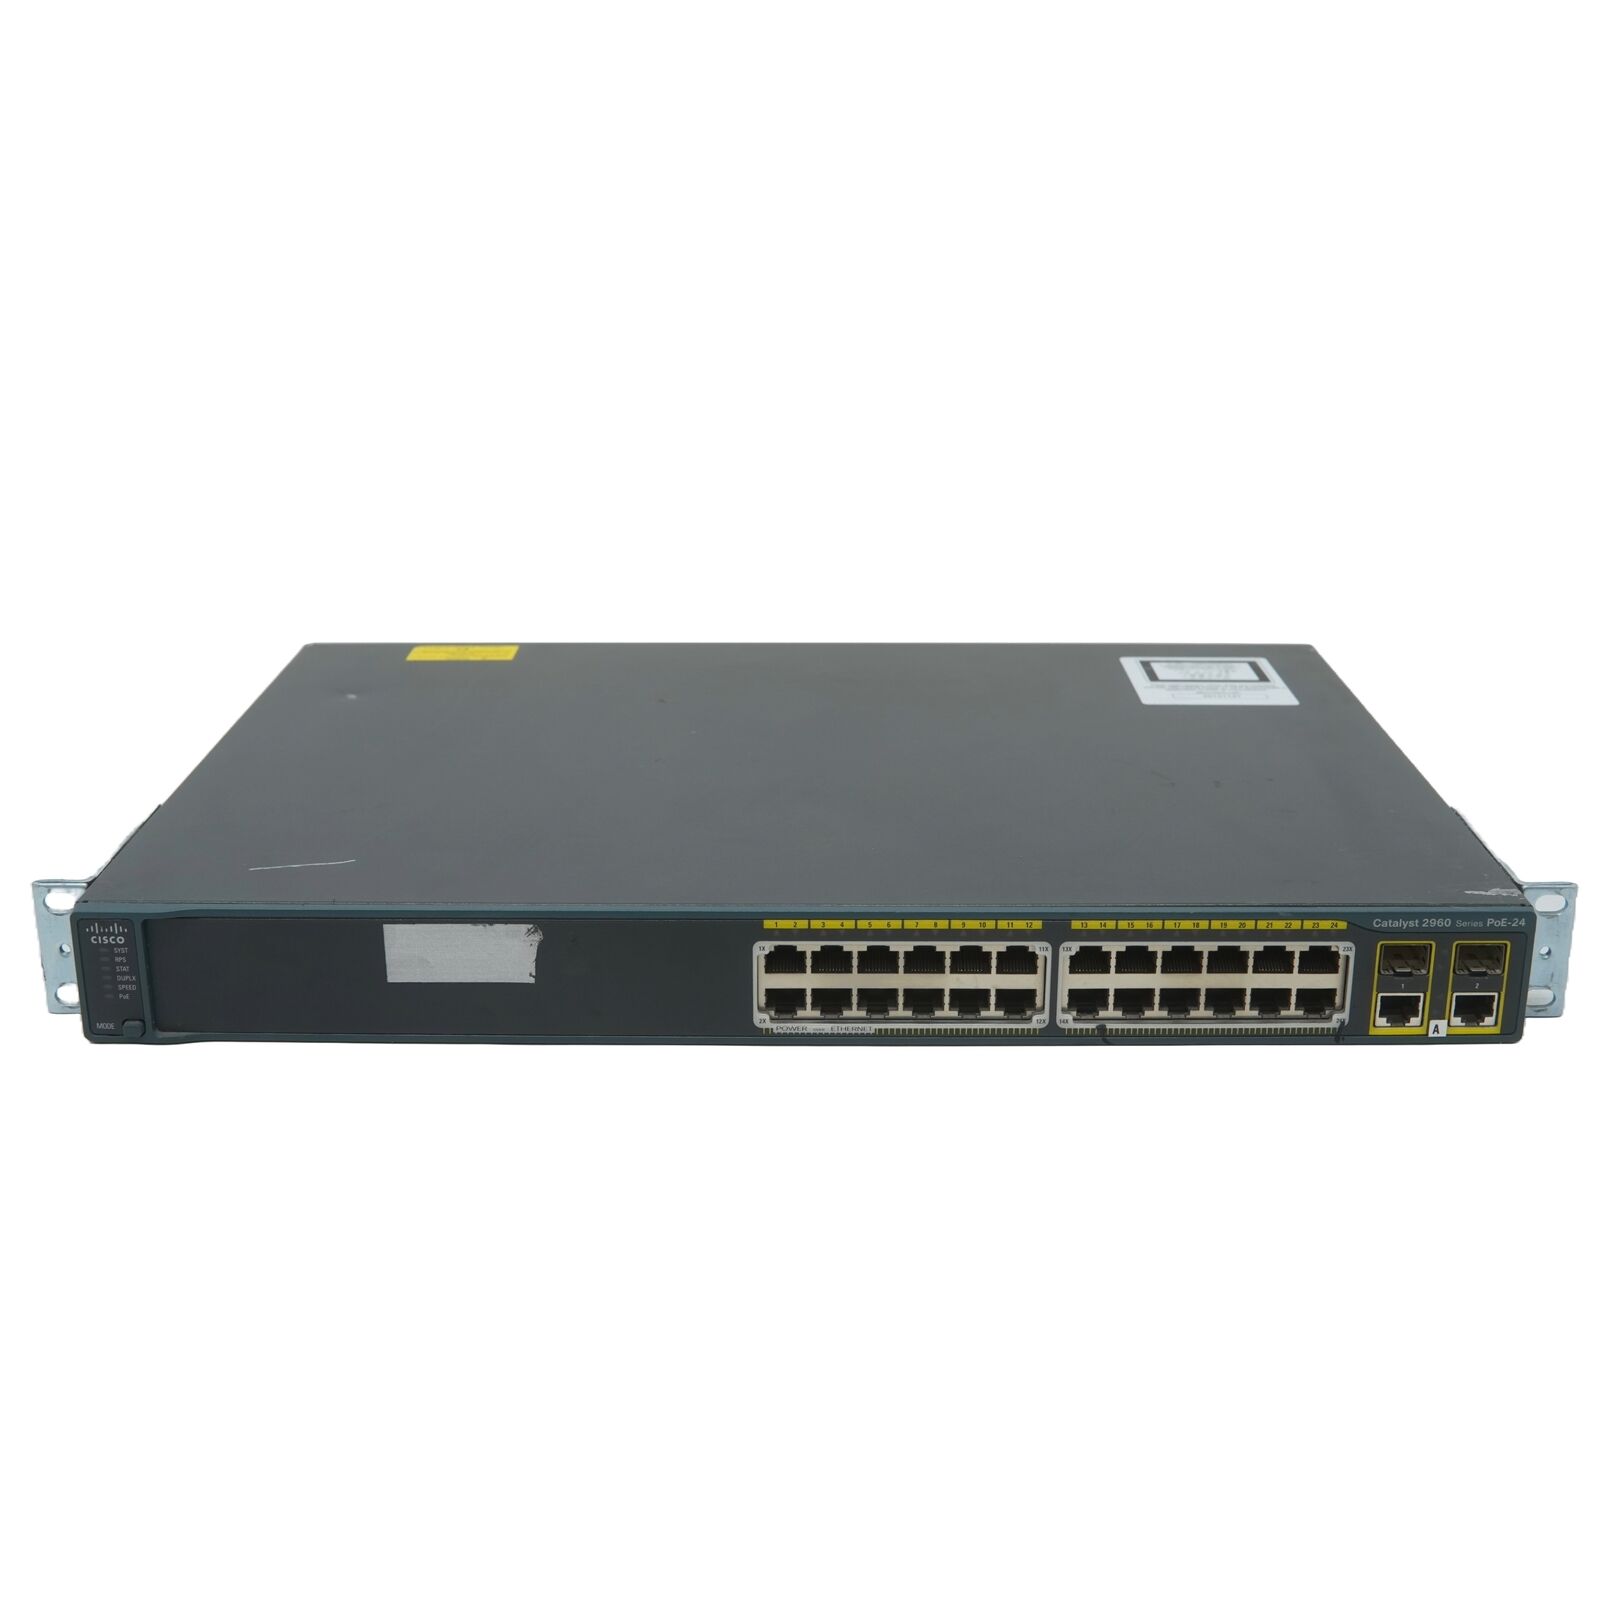 Cisco Catalyst 2960 Series 24-Port Managed Fast Ethernet Switch WS-C2960-24PC-L